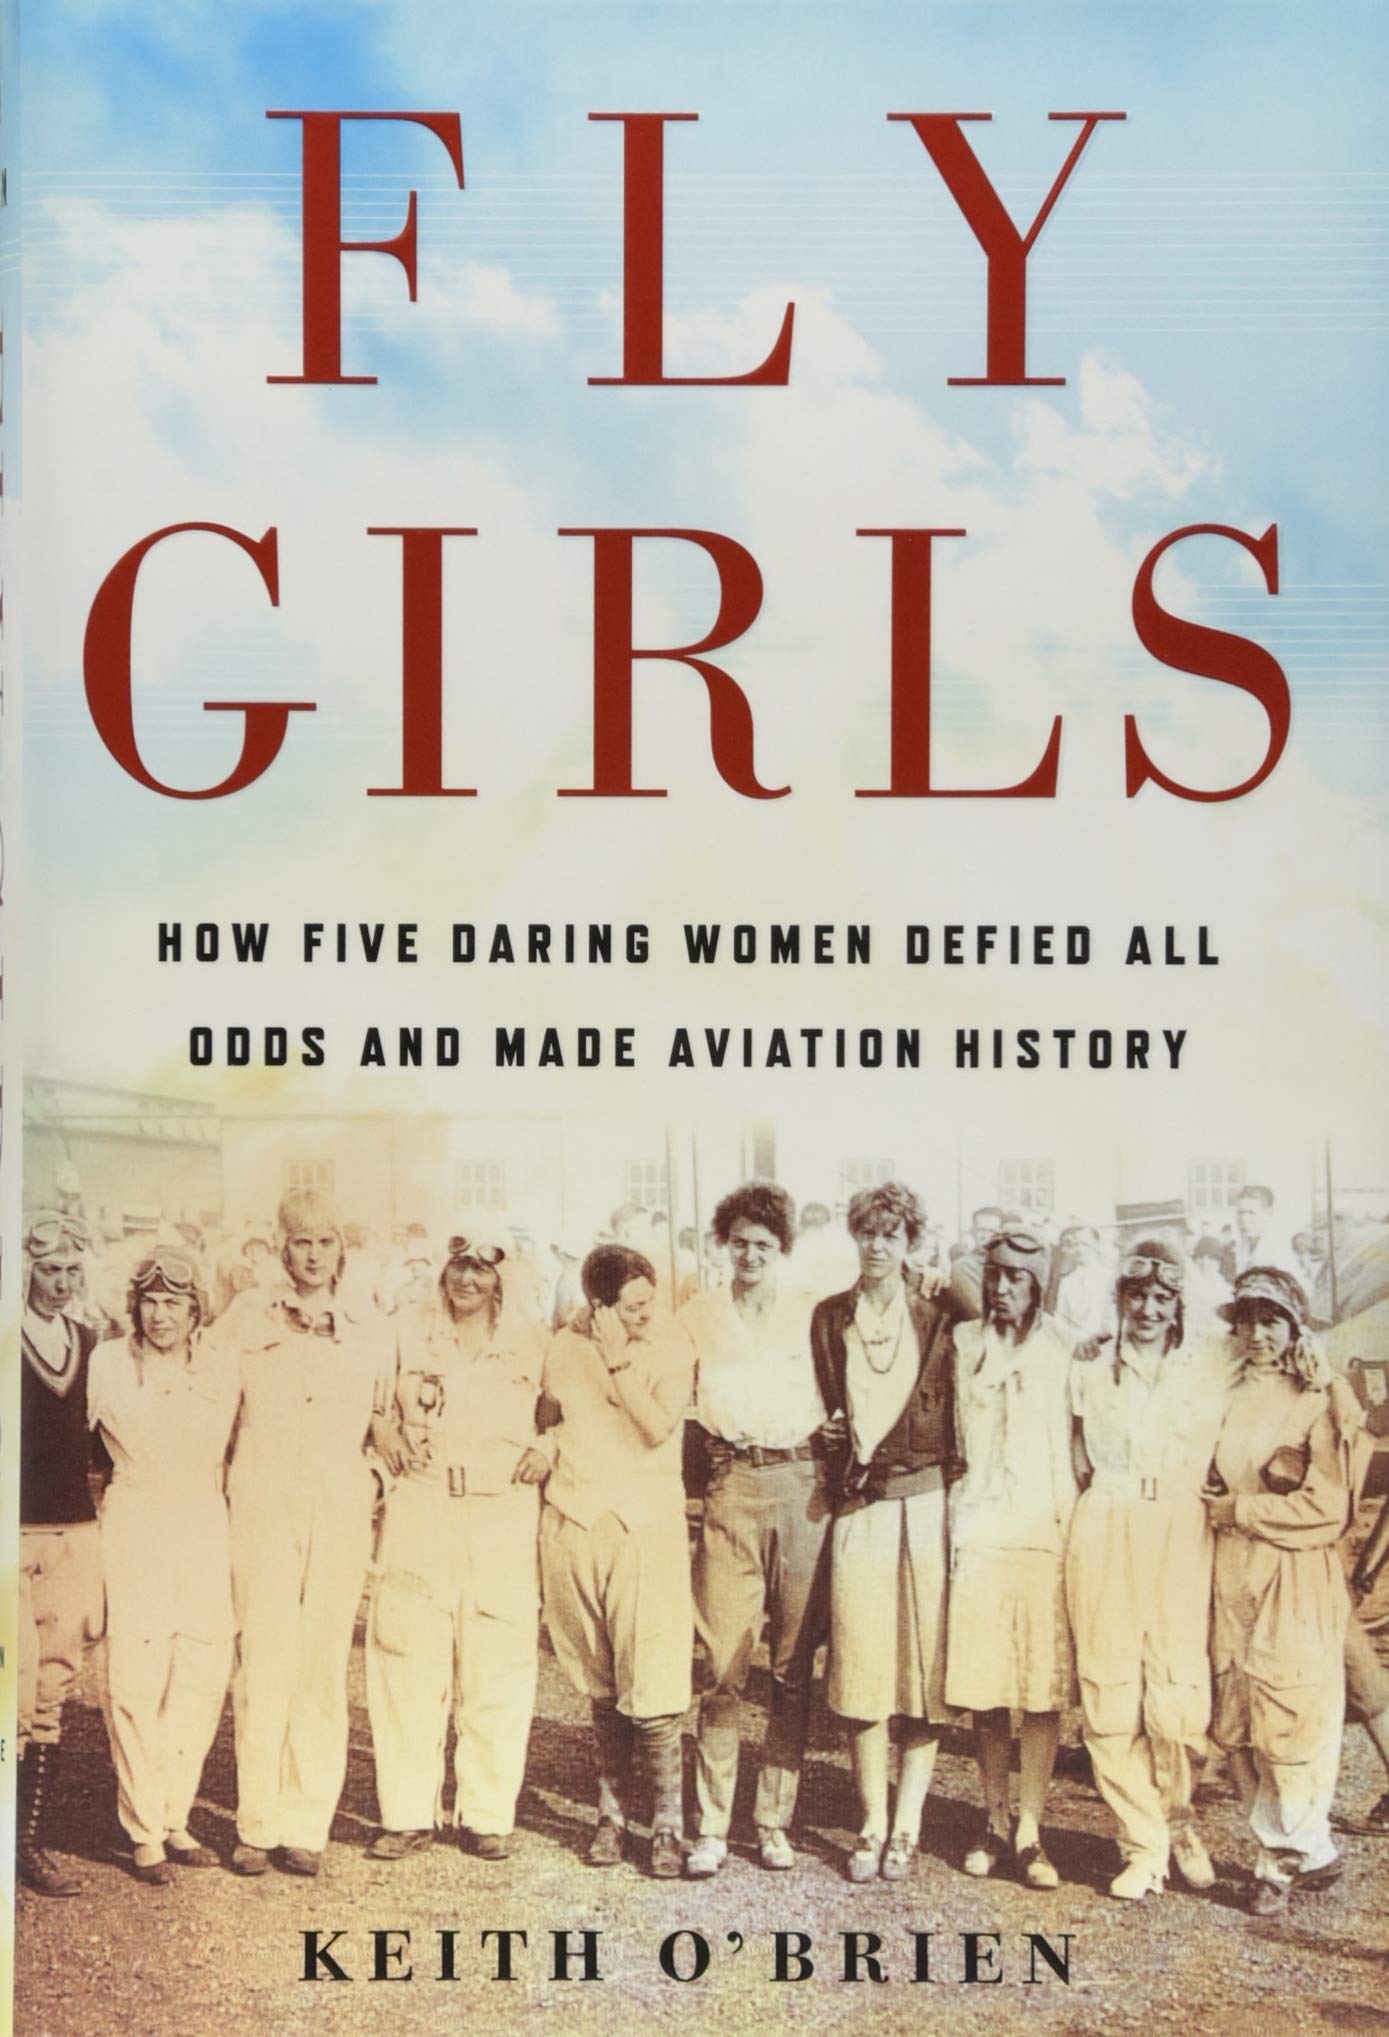 Fly Girls: How Five Daring Women Defied All Odds and Made Aviation History by Keith O'Brien